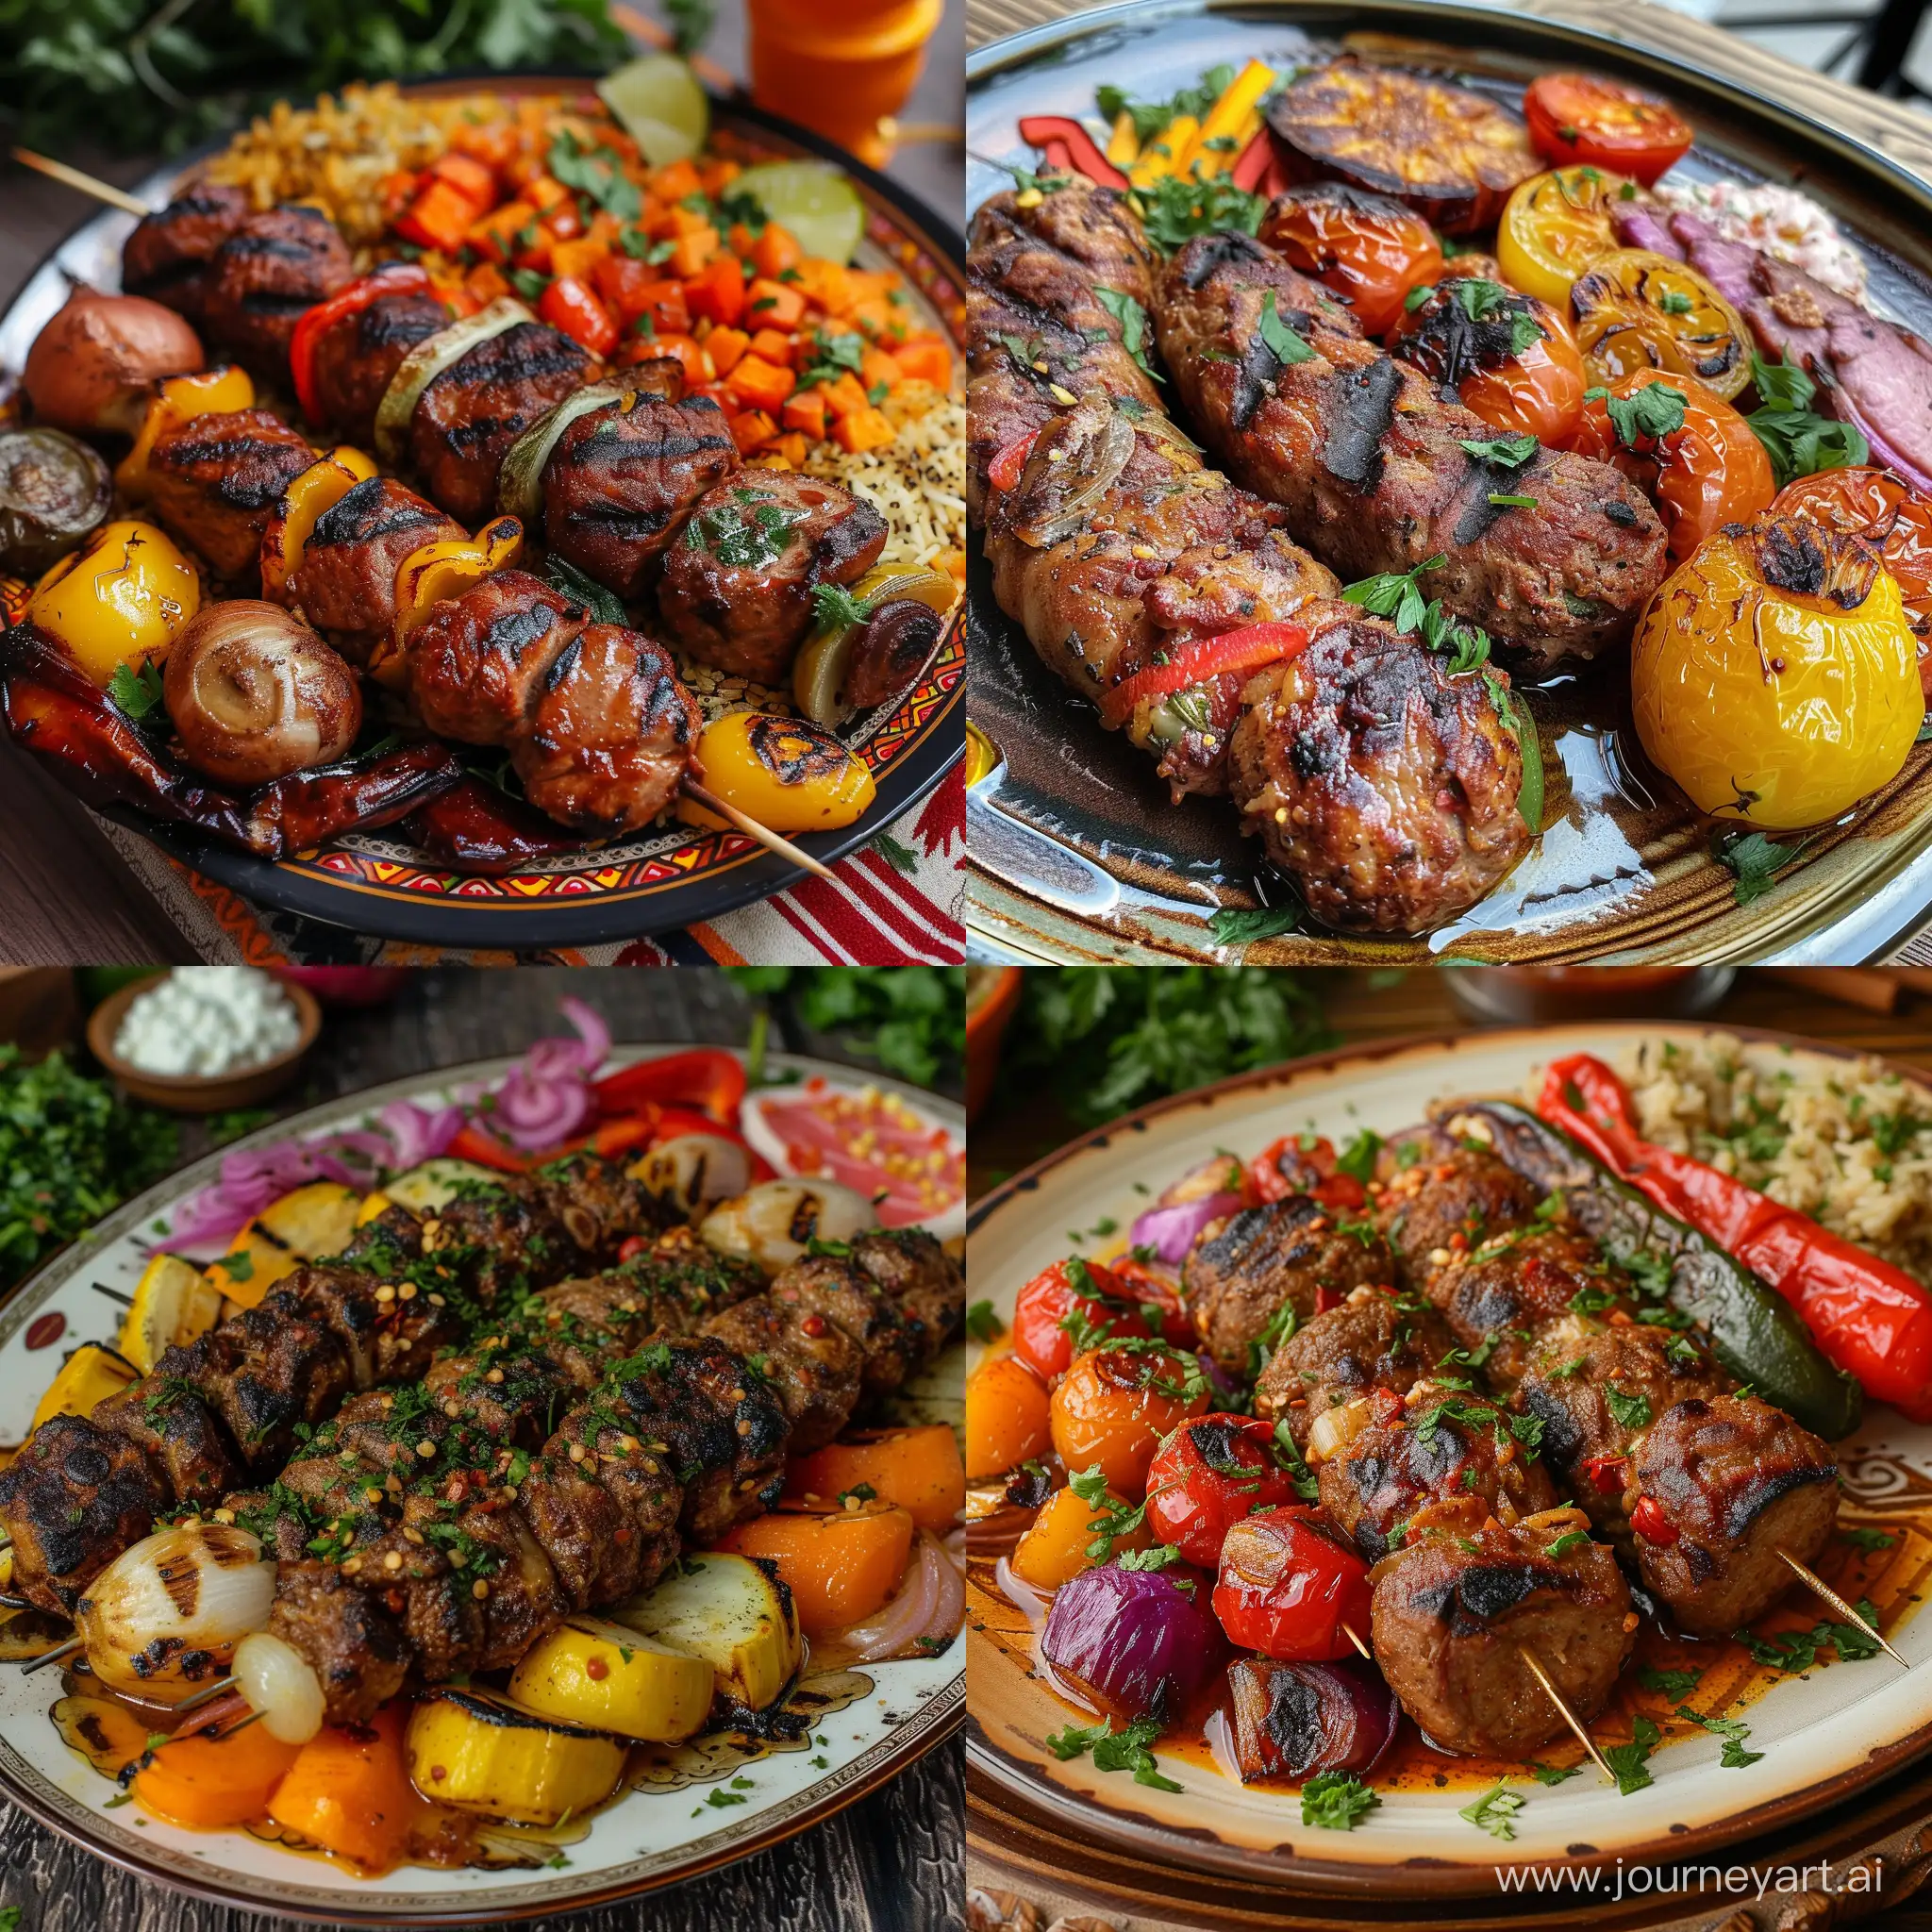 Exquisite-Iskander-Kebab-Dish-with-Rich-Decoration-and-Stunning-Visuals